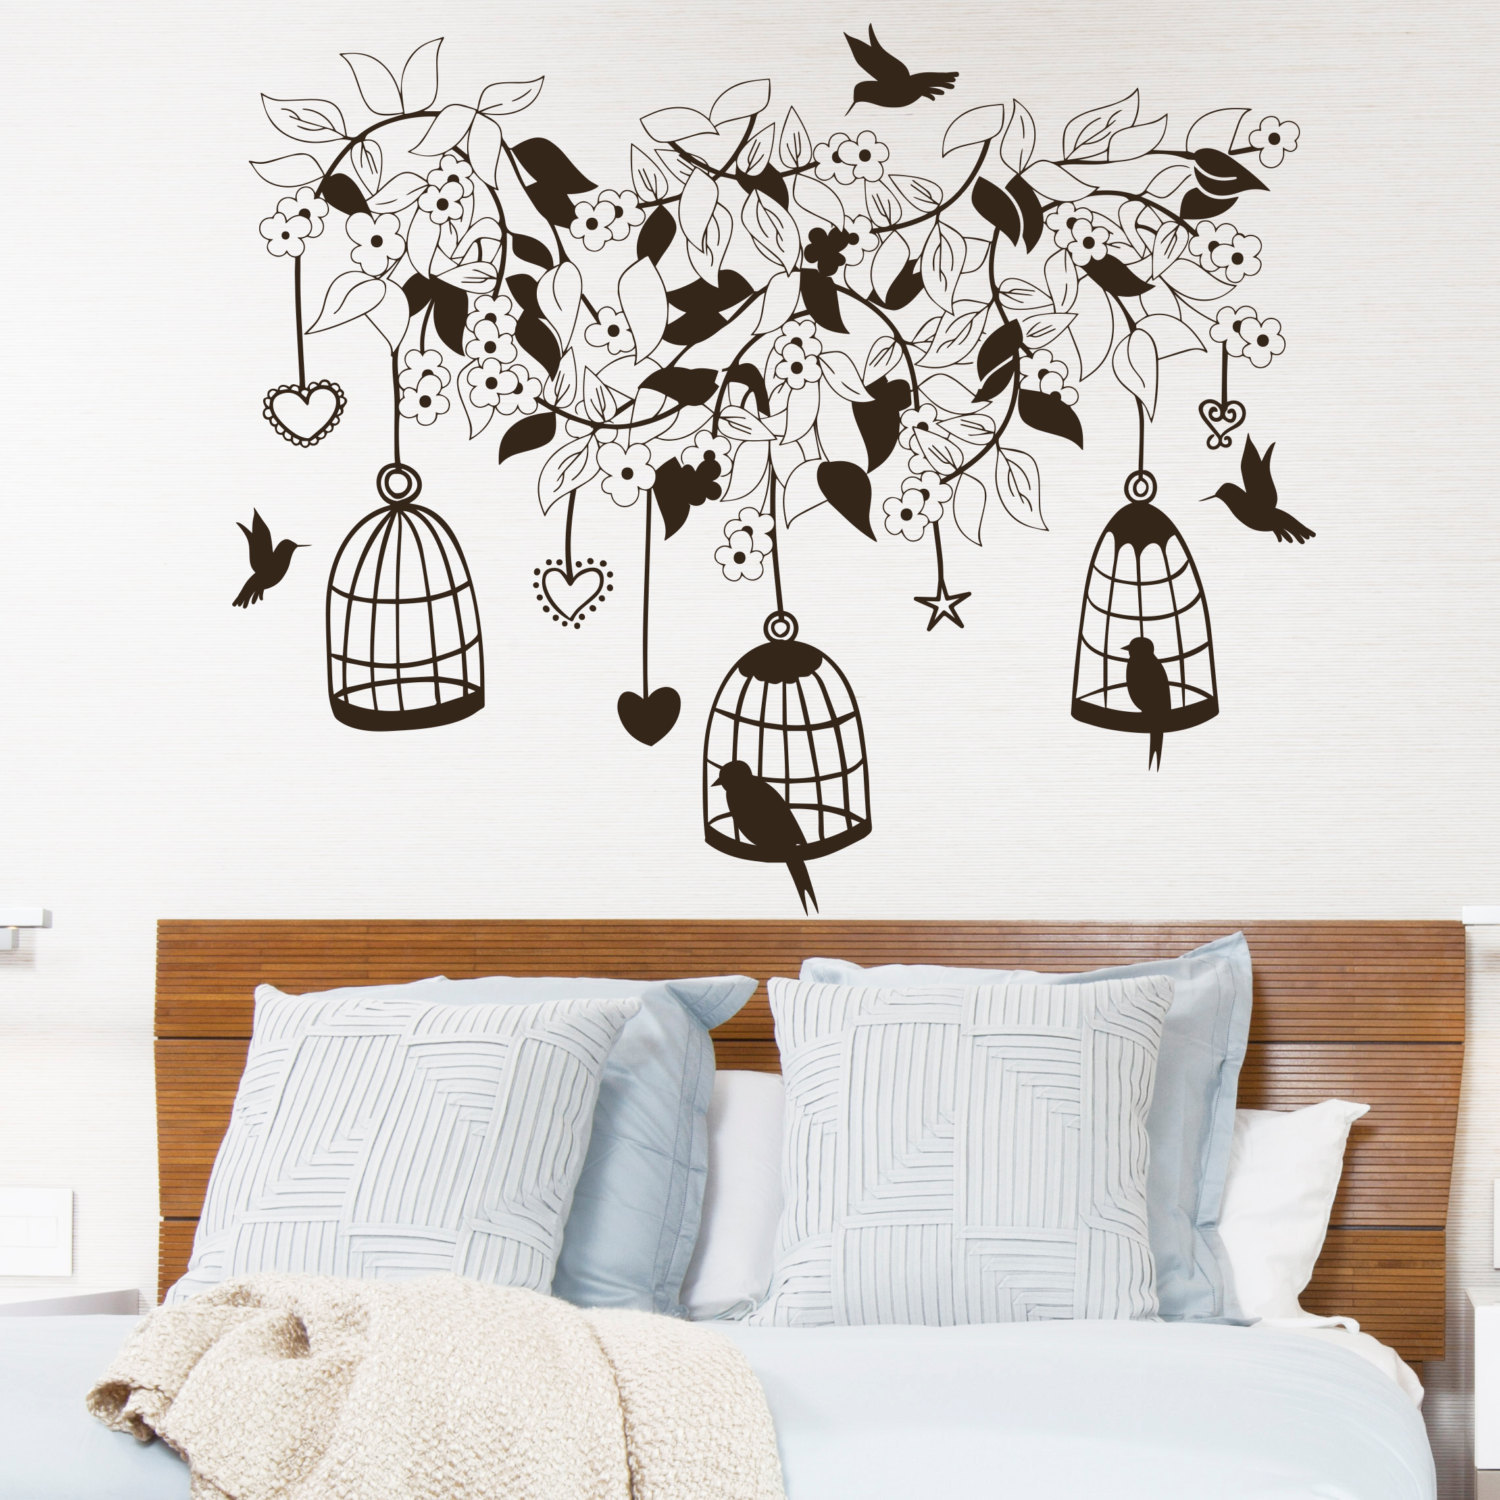 Art Bird Cage Wall Sticker Family Wall Decal Home Decoration Bedroom living room